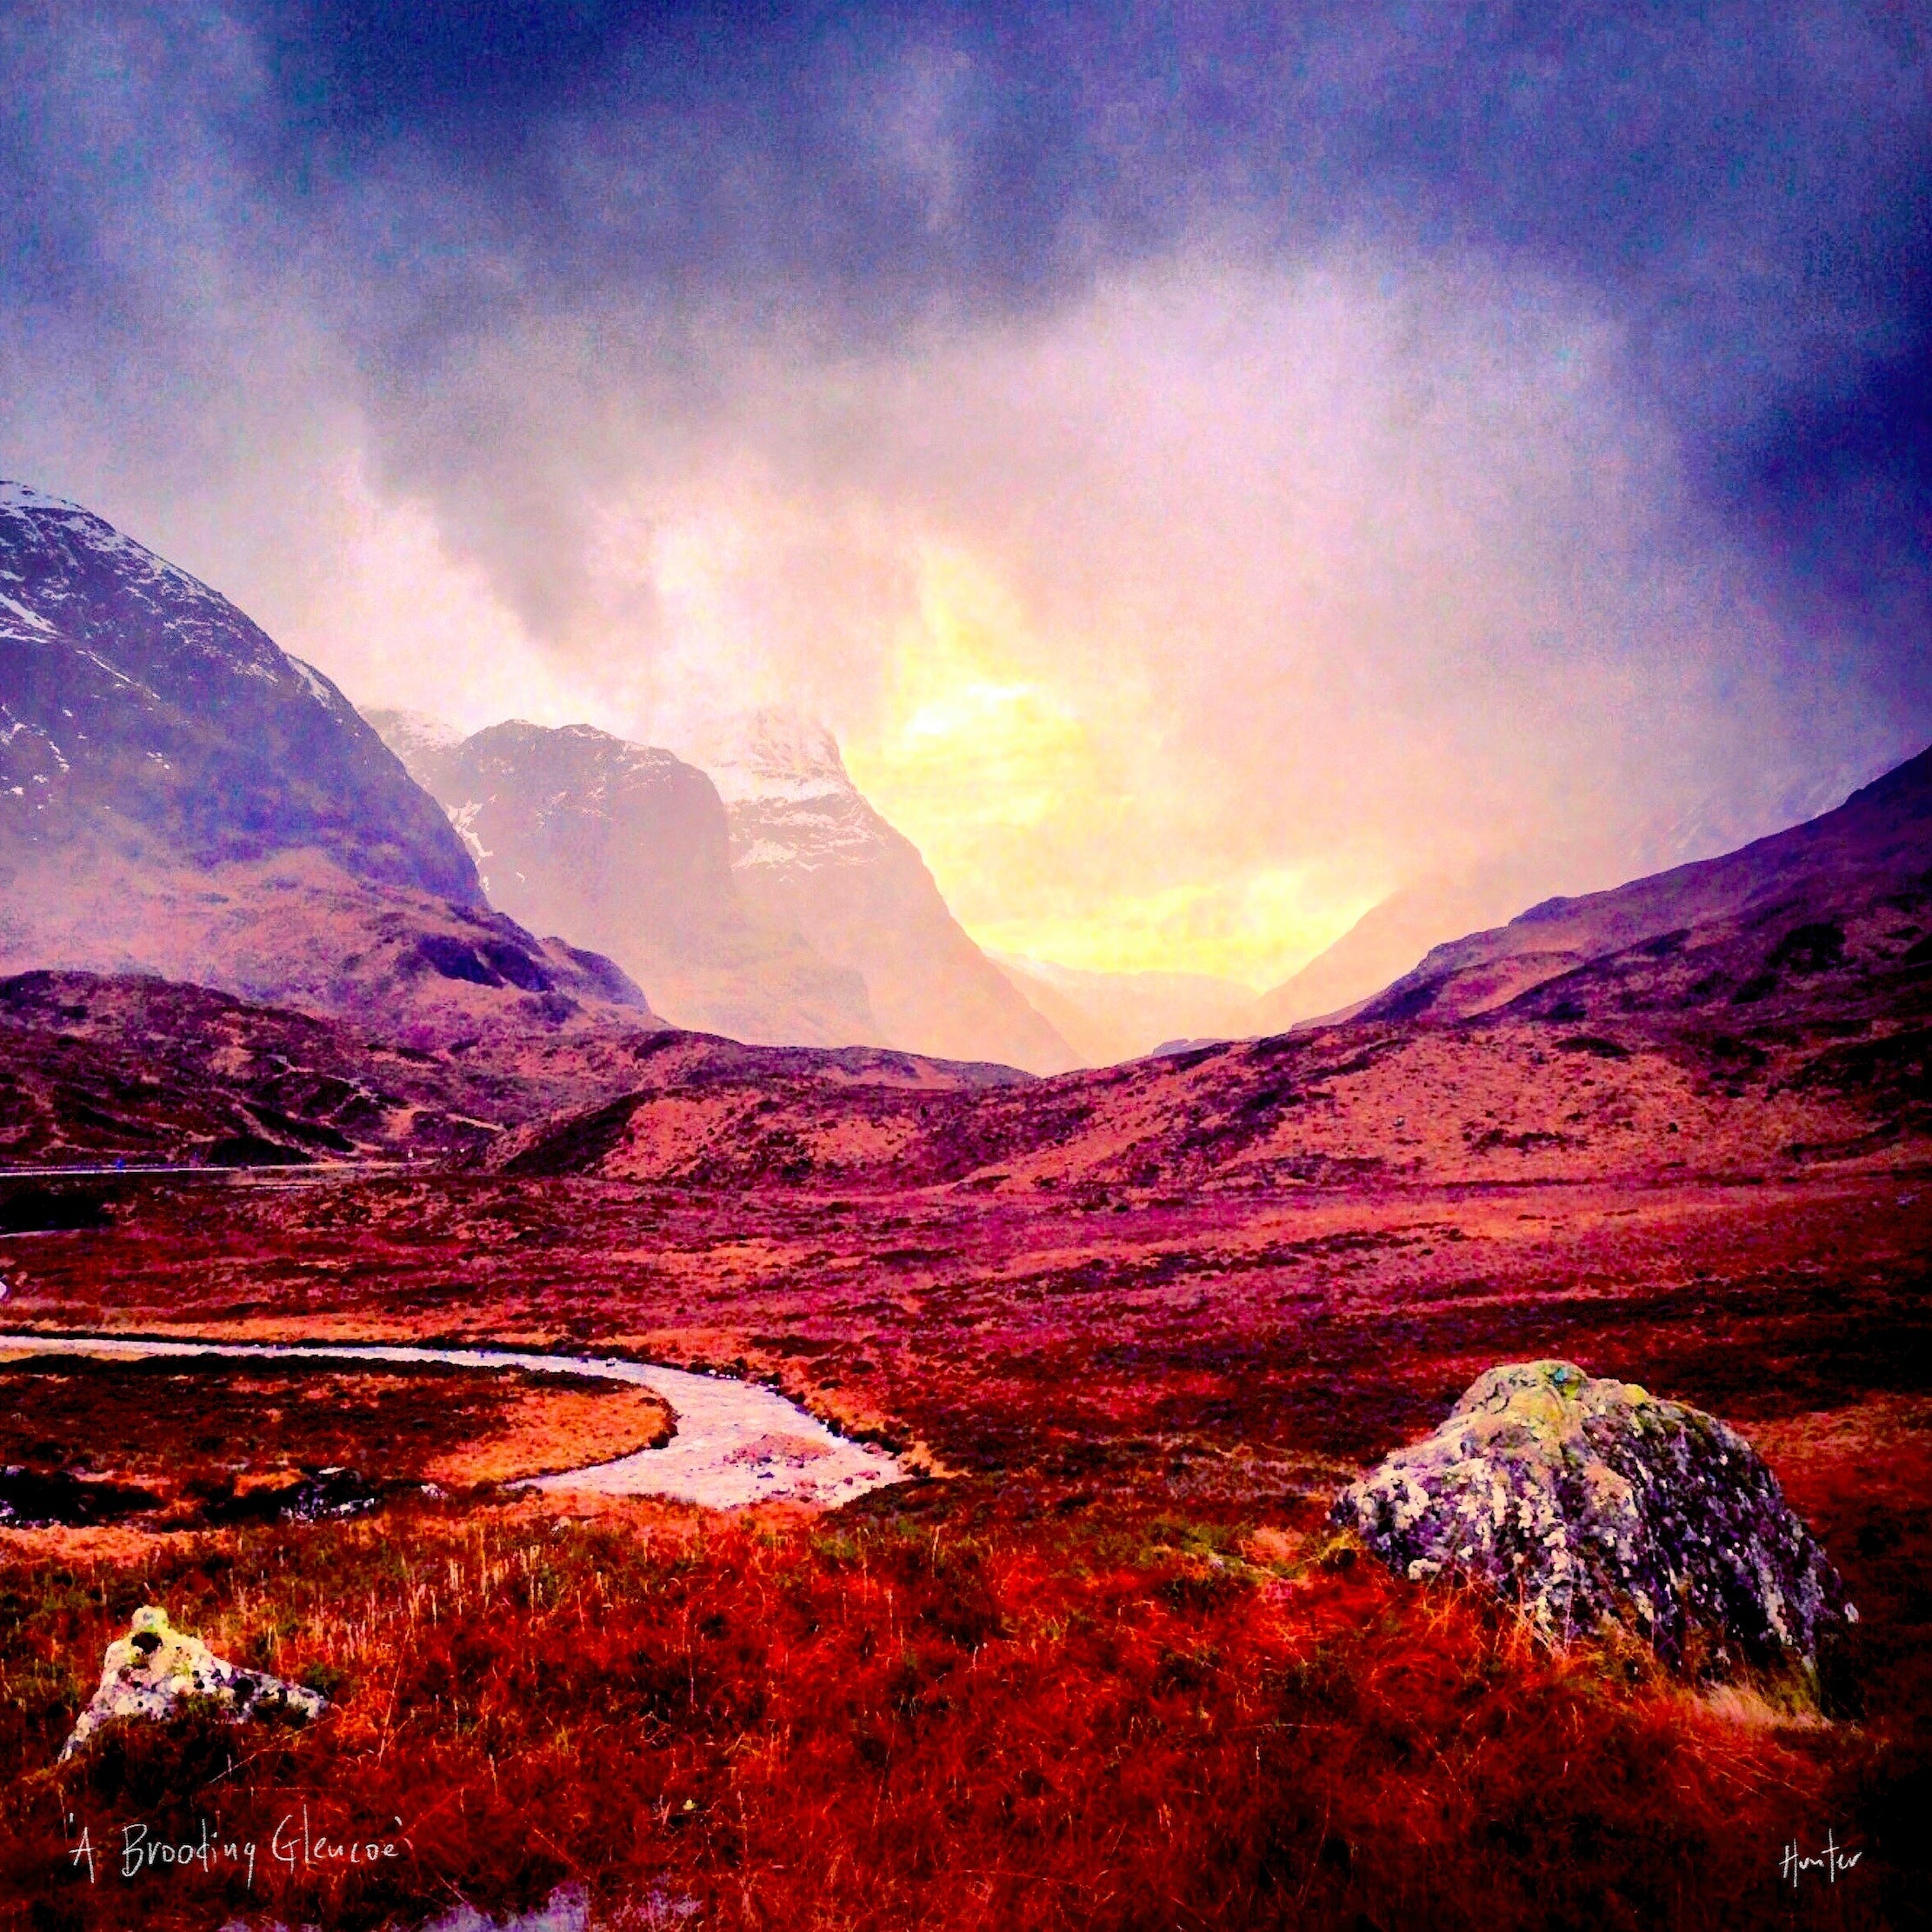 A Brooding Glencoe | Scotland In Your Pocket Art Print-Scotland In Your Pocket Framed Prints-Glencoe Art Gallery-Paintings, Prints, Homeware, Art Gifts From Scotland By Scottish Artist Kevin Hunter